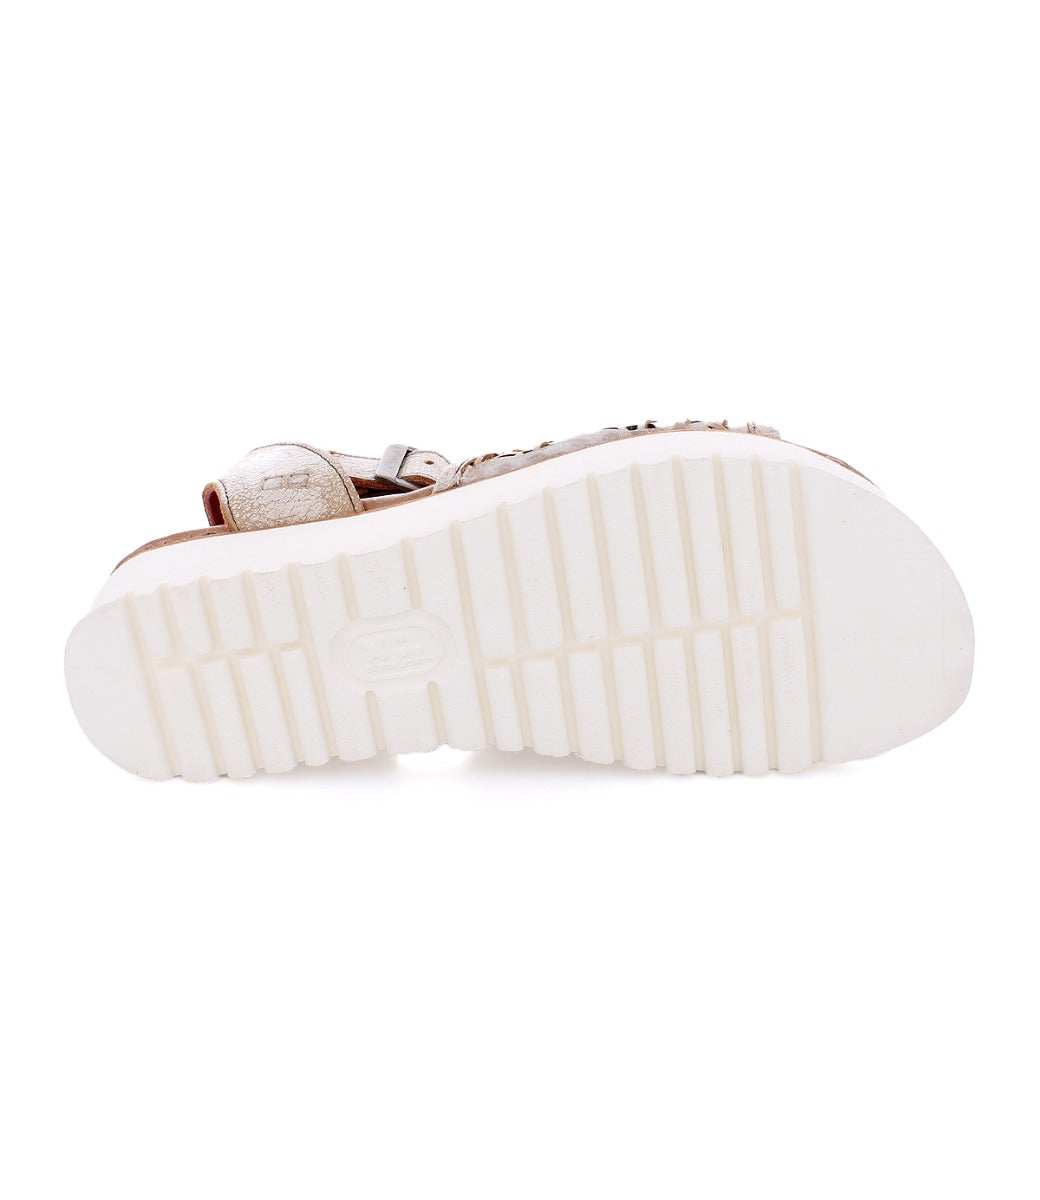 A pair of Bed Stu Brisa women's sandals on a white background.